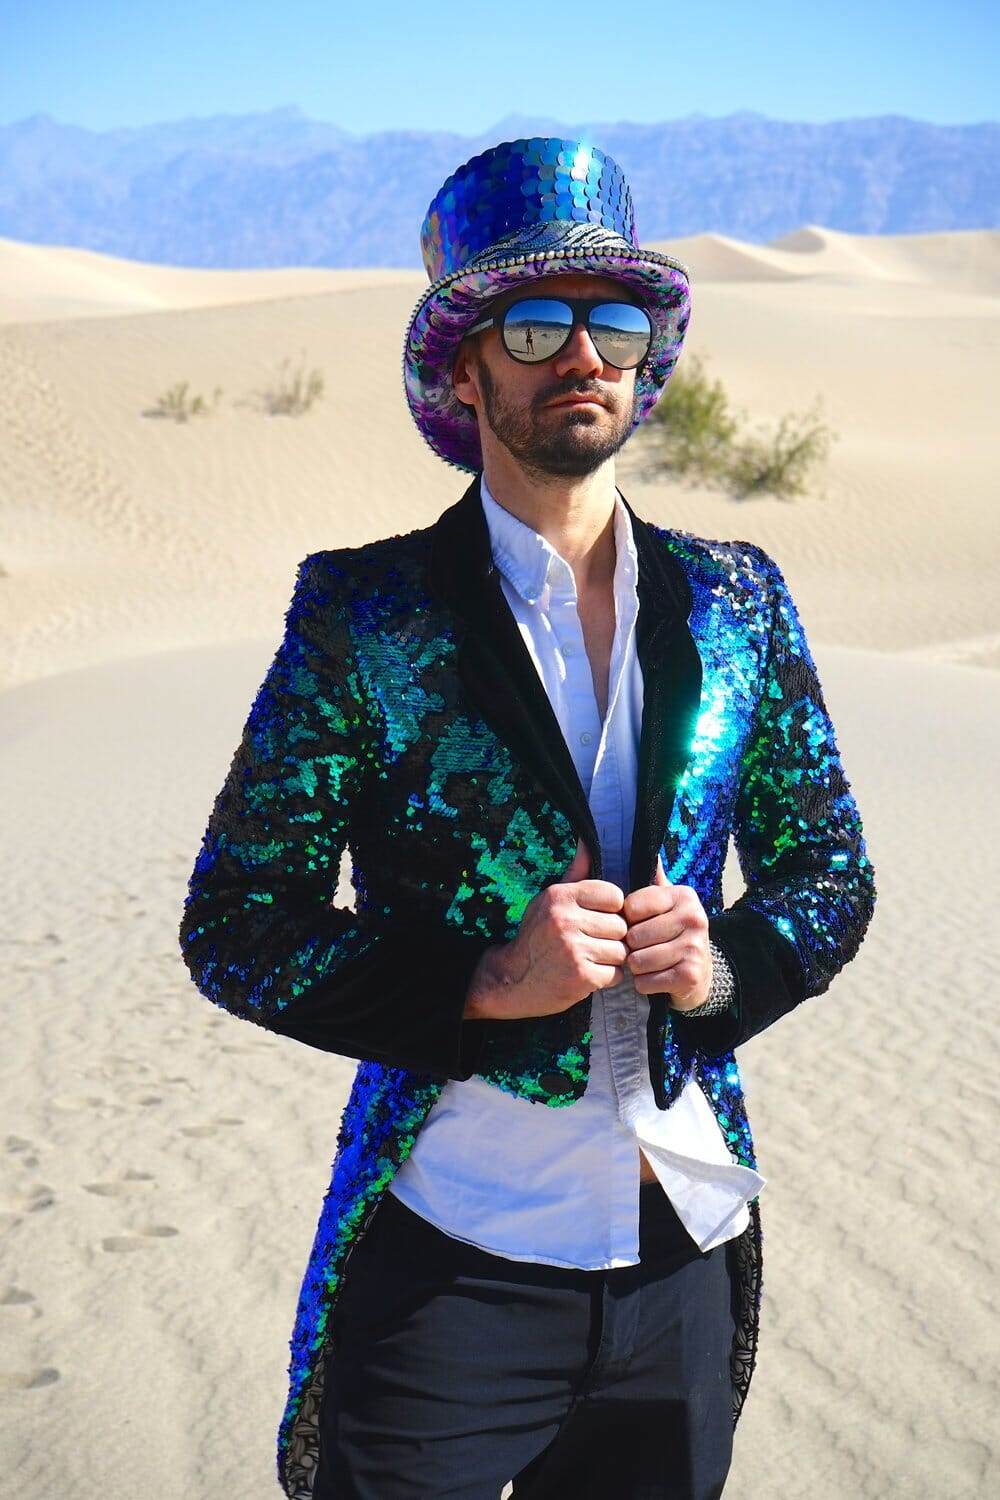 Mens Sequin Suit Jacket from Love Khaos Ethically Made Festival Clothing brand